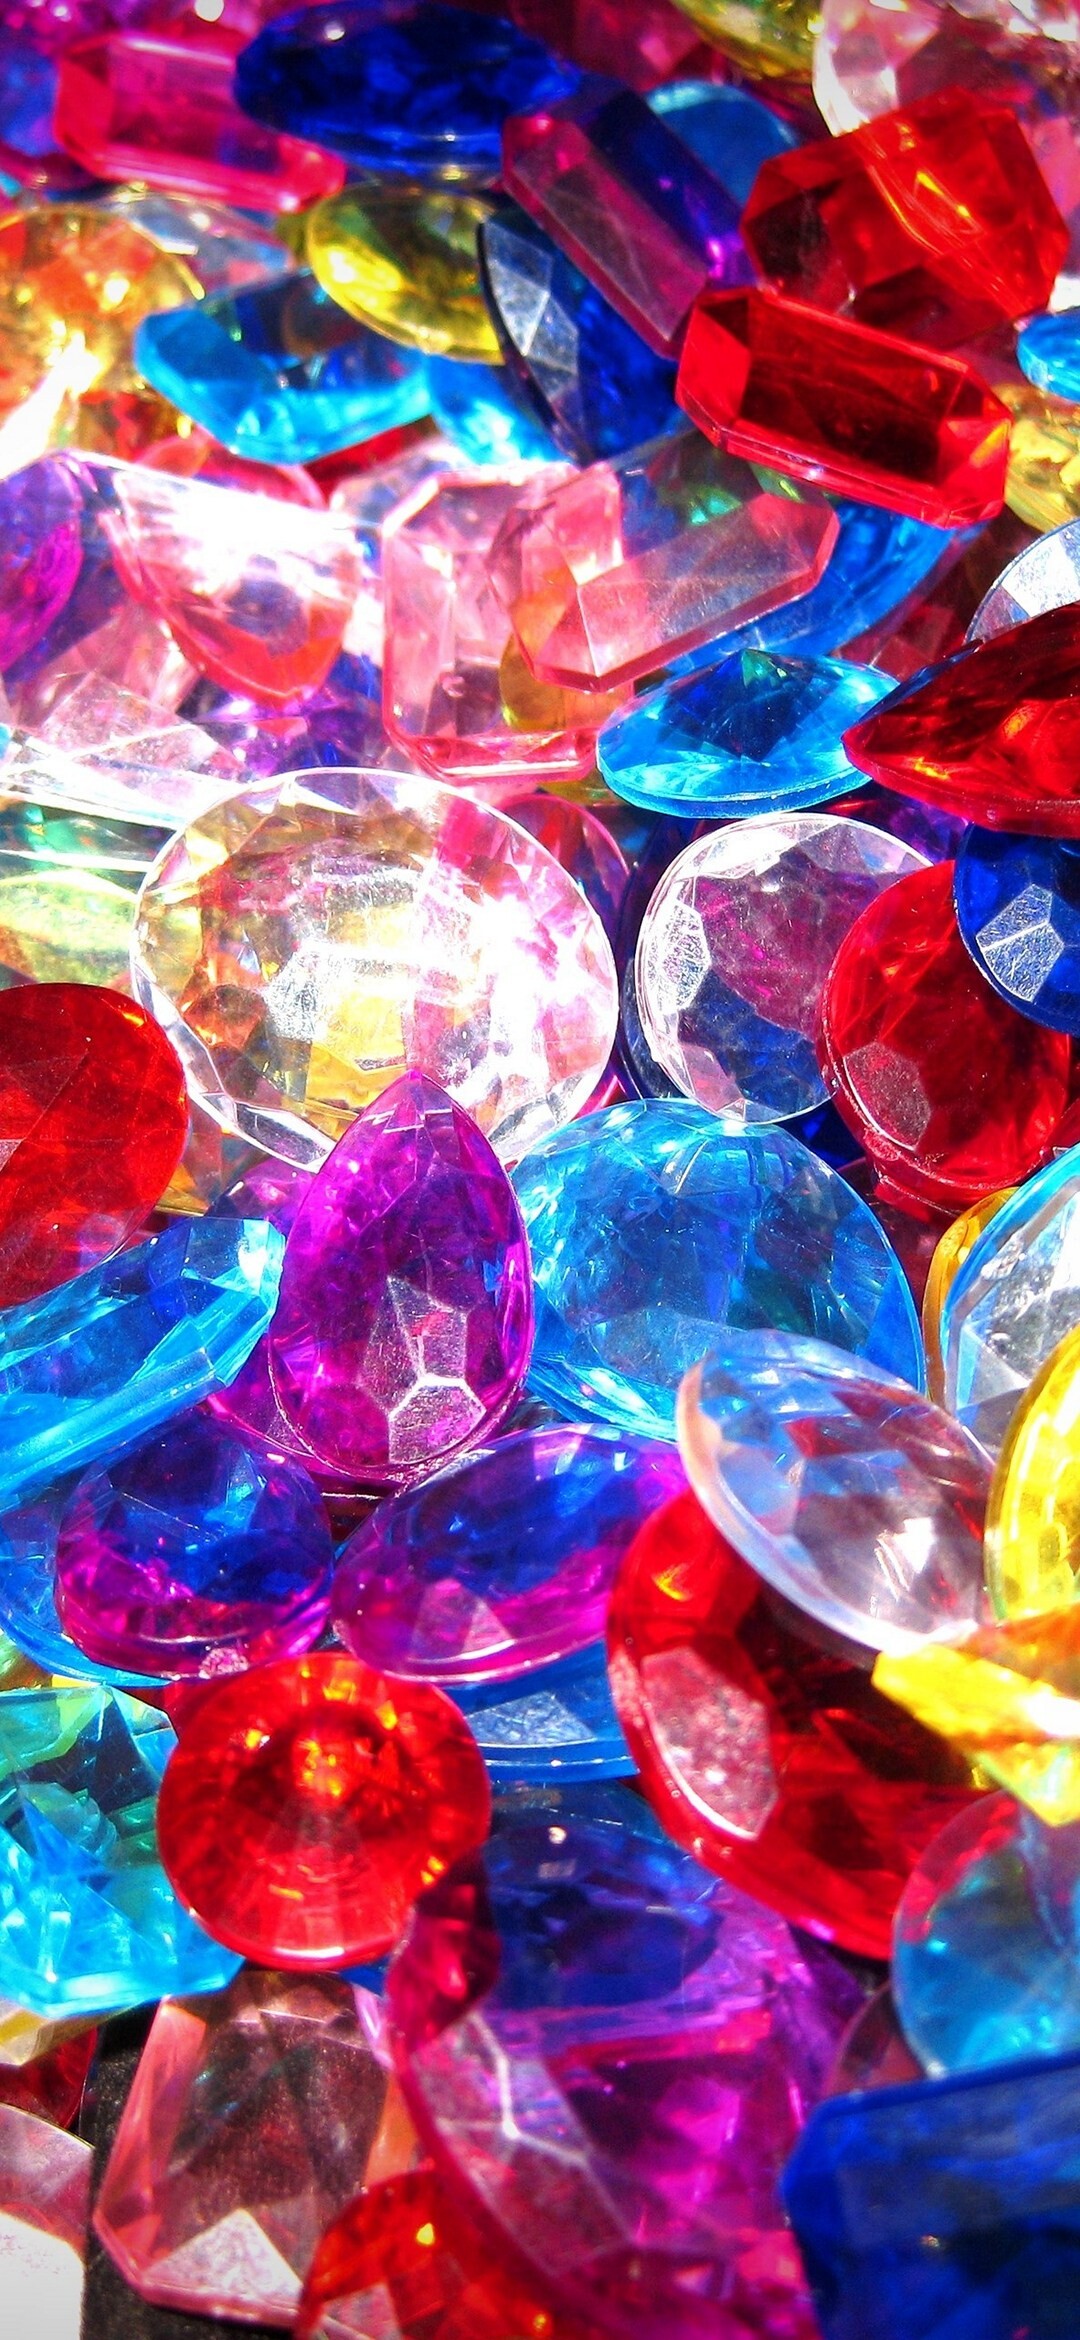 Gemstone: Colorful rocks, Various minerals highly prized for beauty durability and rarity. 1080x2340 HD Wallpaper.